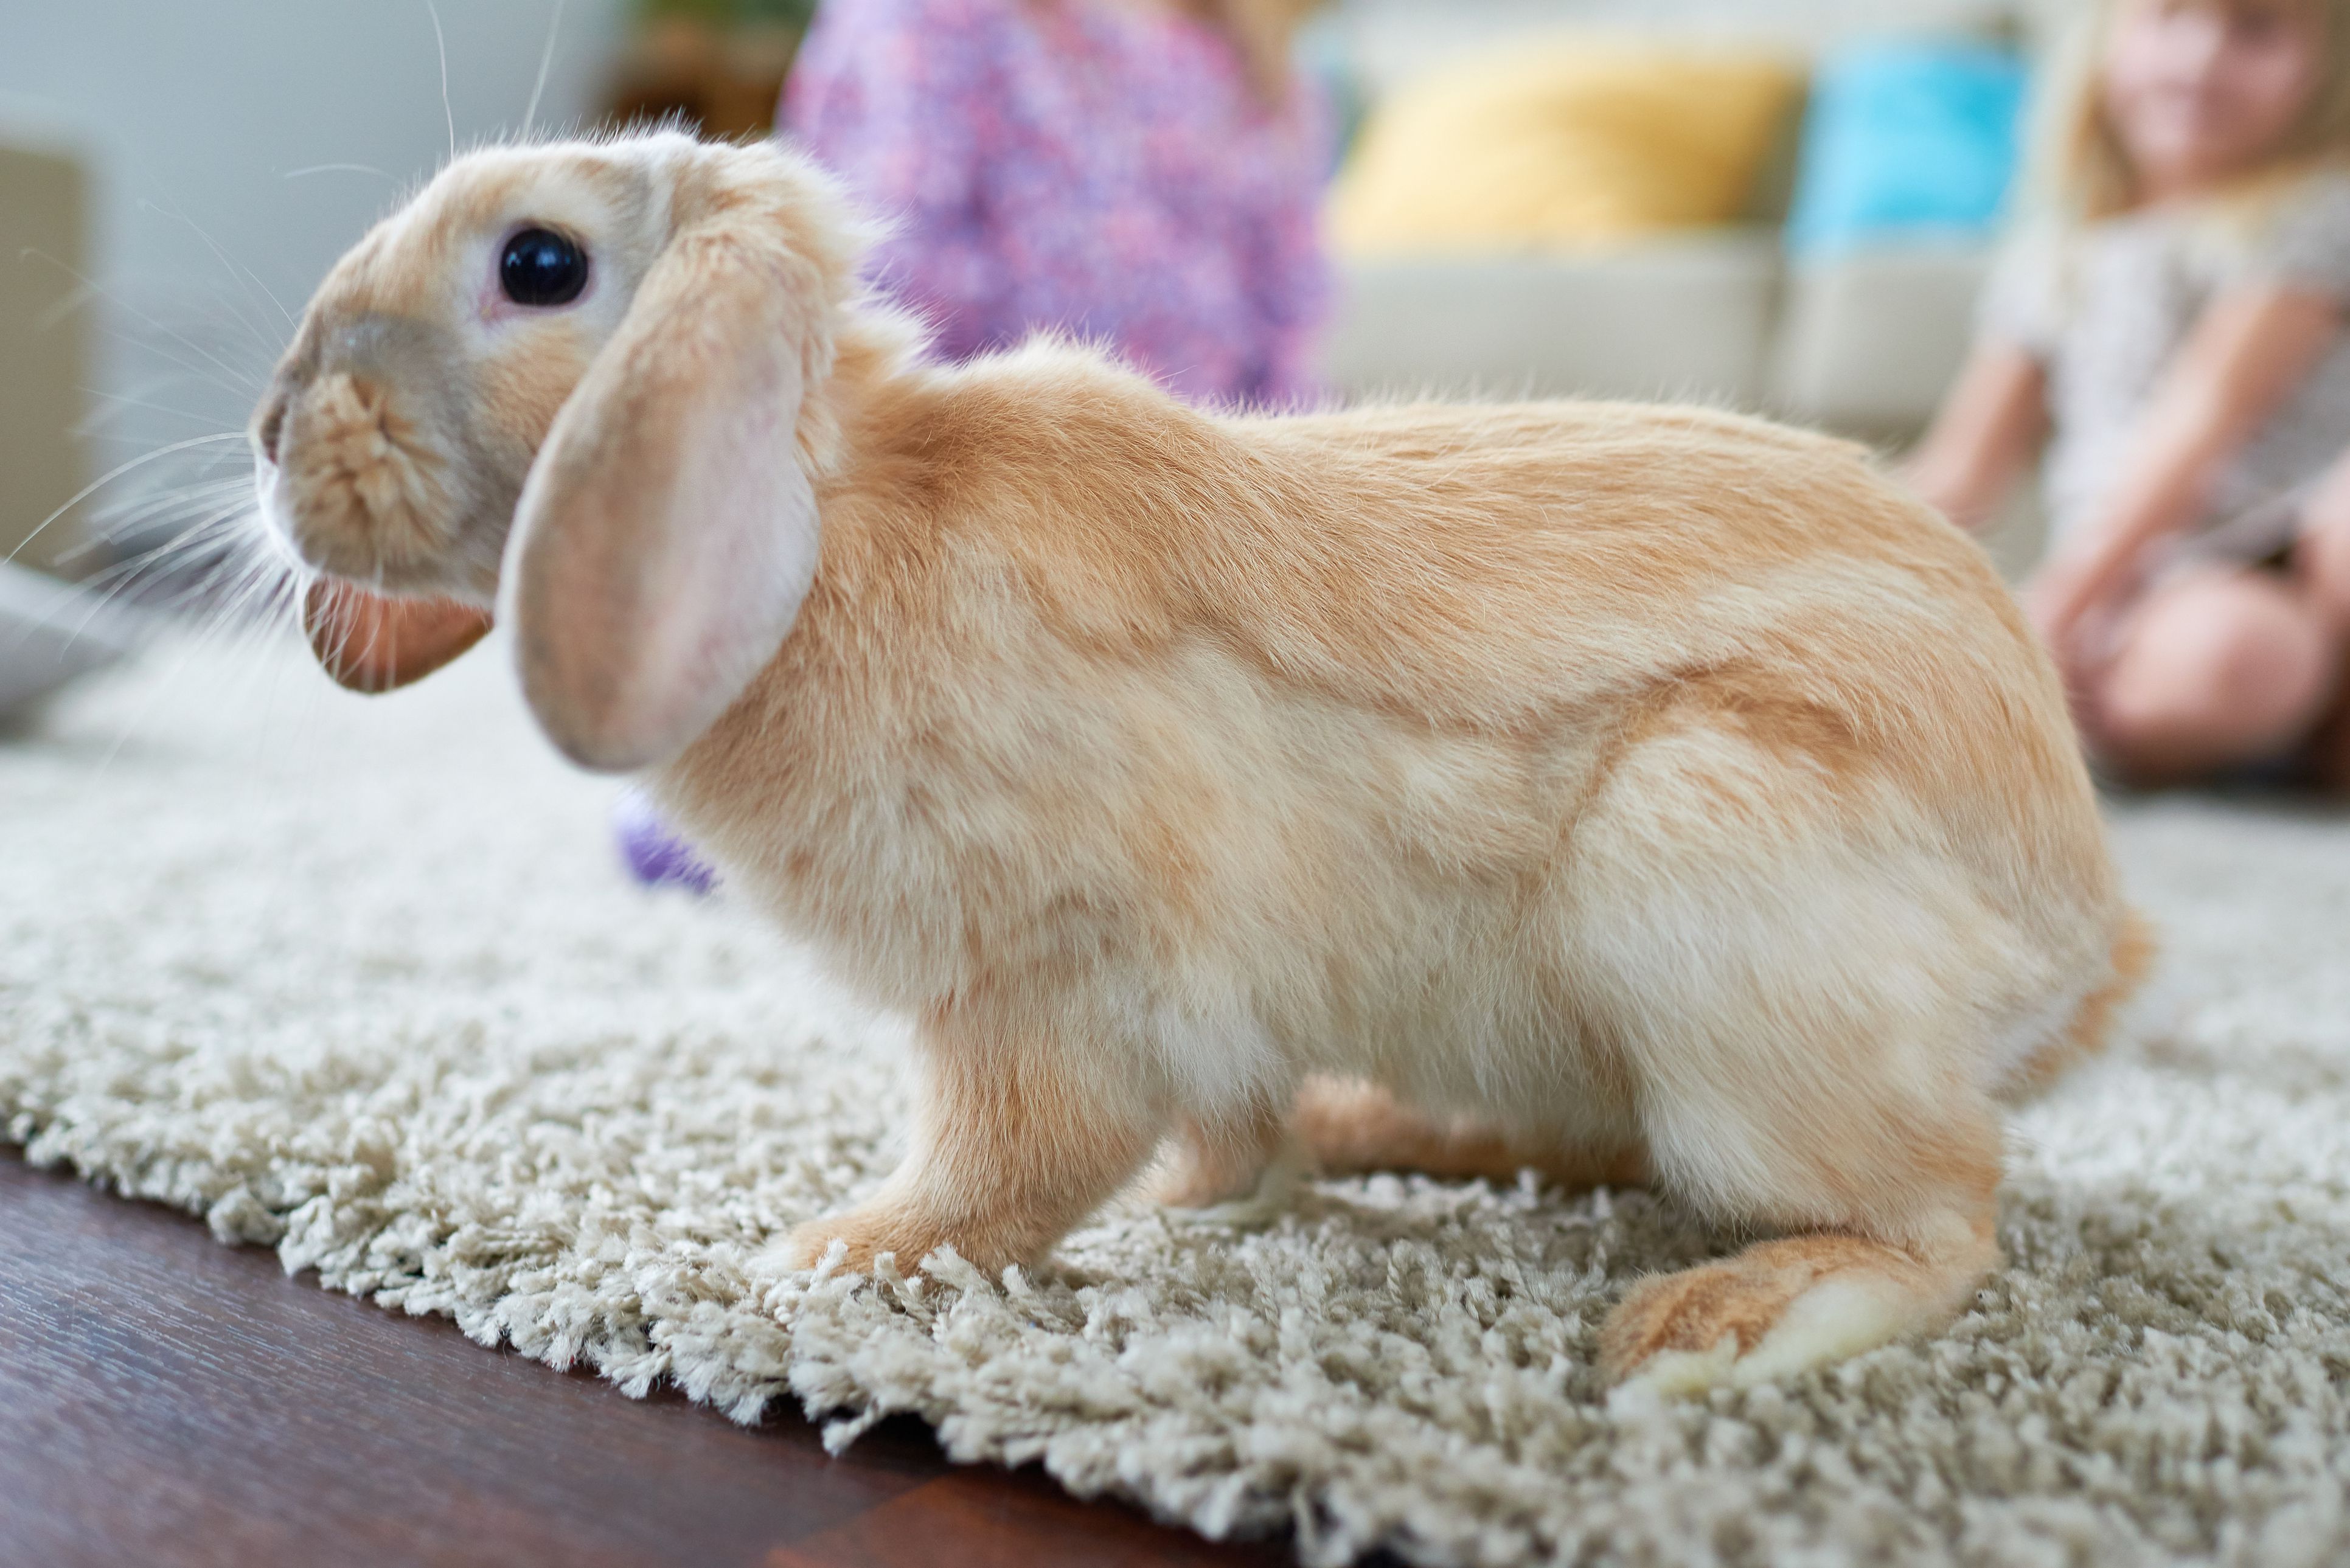 Training Rabbits to Stop Digging up the Carpet